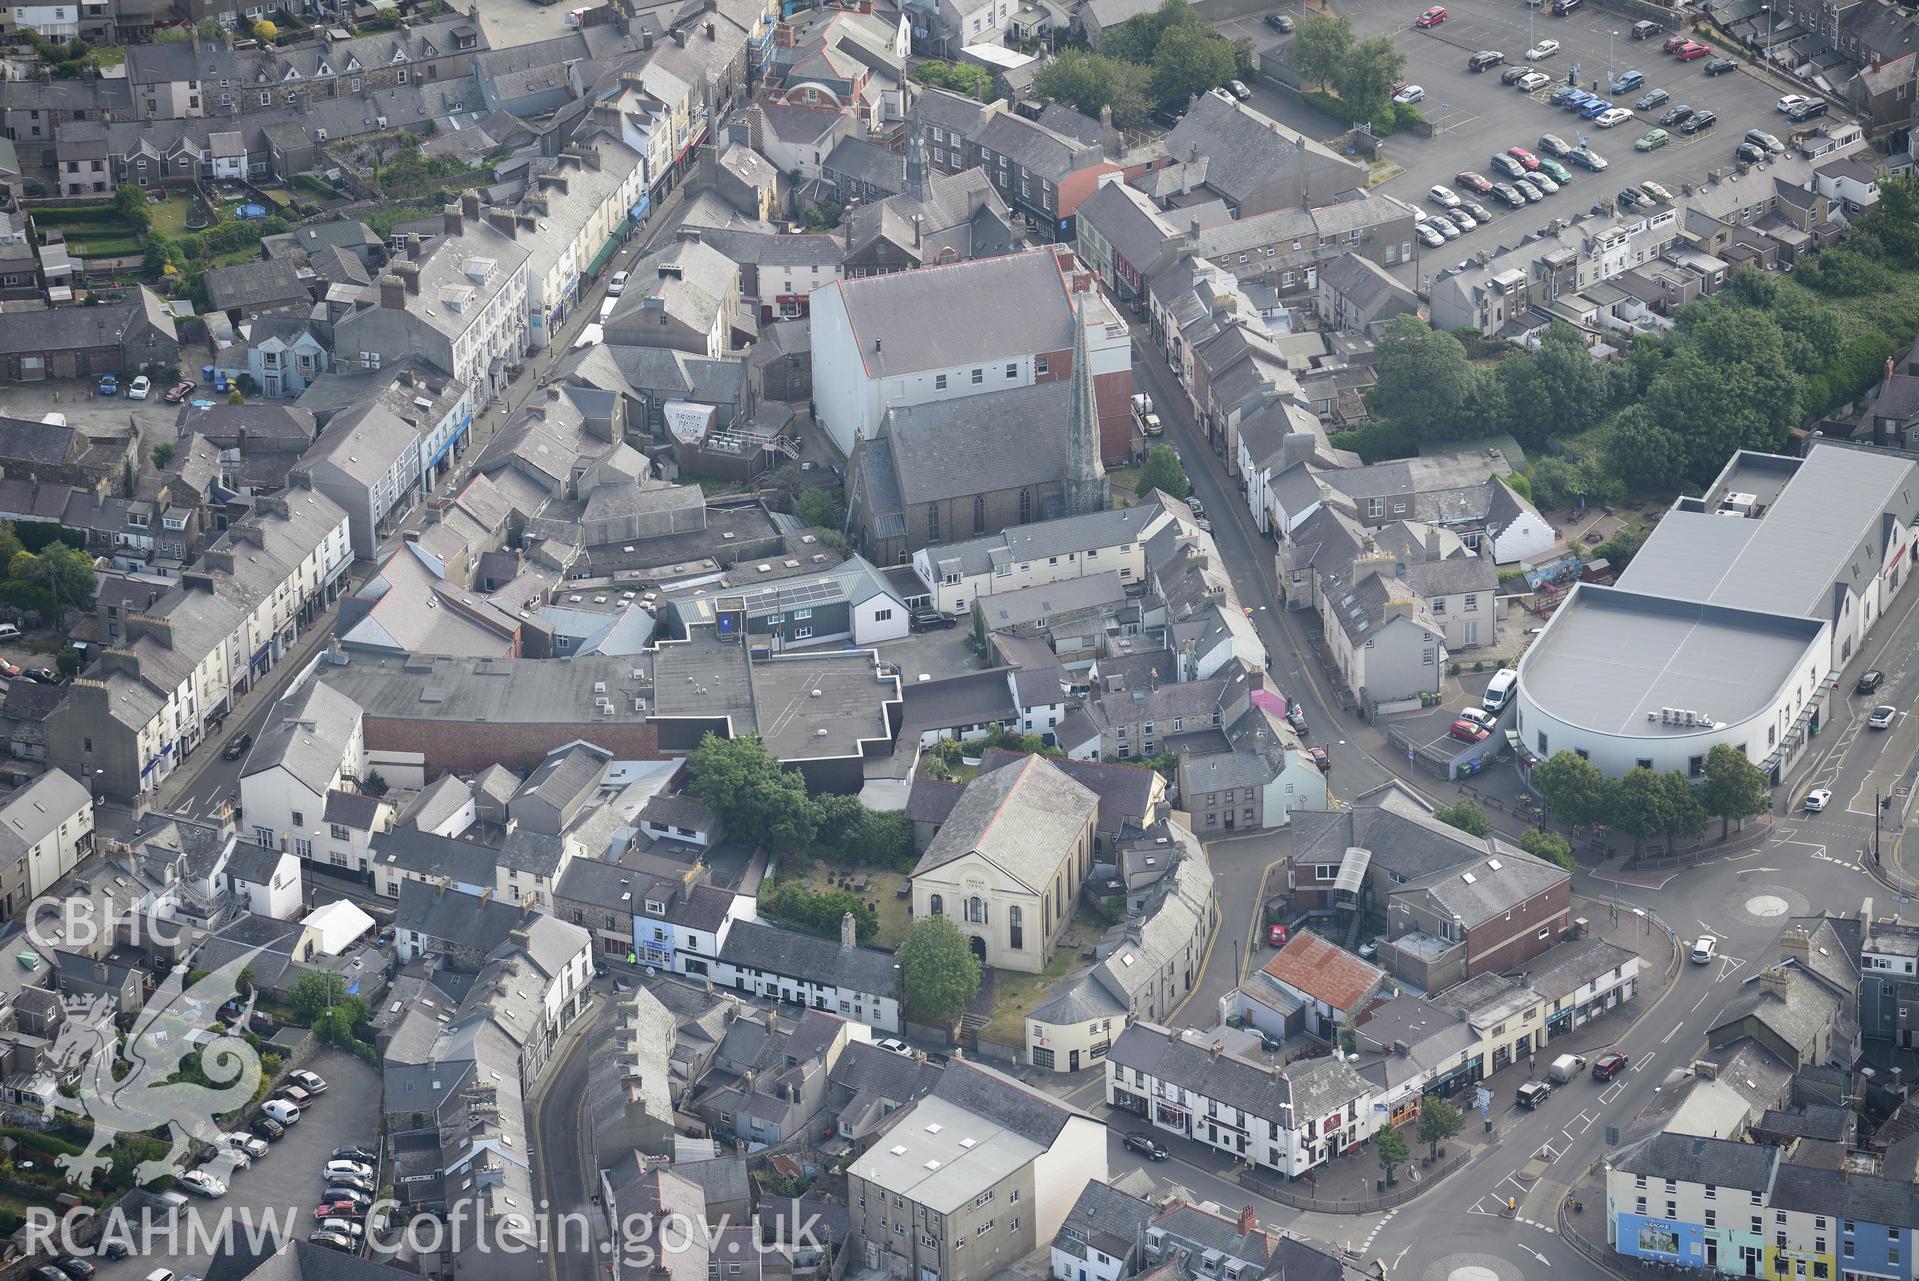 Pen-Lan Independent Chapel; Tabernacl Baptist Chapel, old Town Hall and new Town Hall (cinema), Pwllheli. Oblique aerial photograph taken during the Royal Commission's programme of archaeological aerial reconnaissance by Toby Driver on 23rd June 2015.